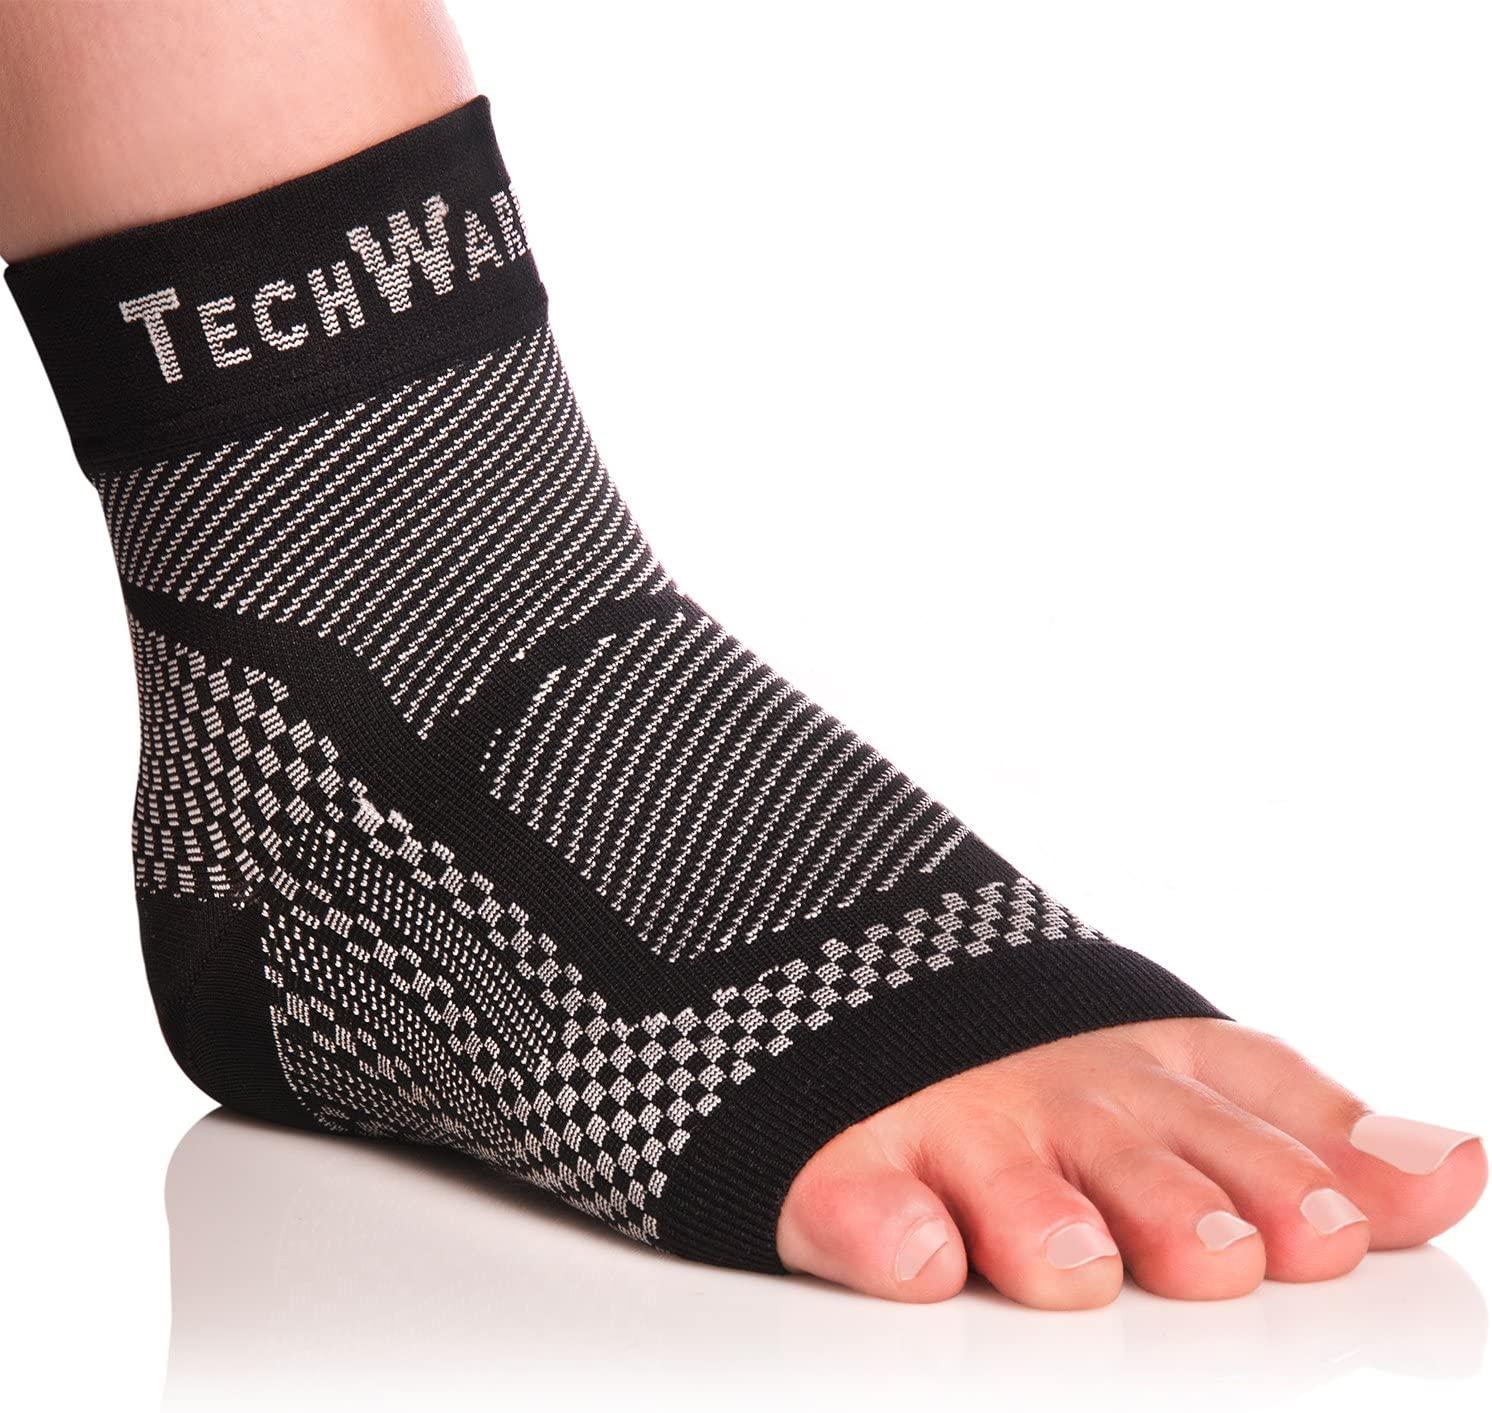 TechWare Pro Ankle Brace Compression Sleeve - Relieves Achilles ...